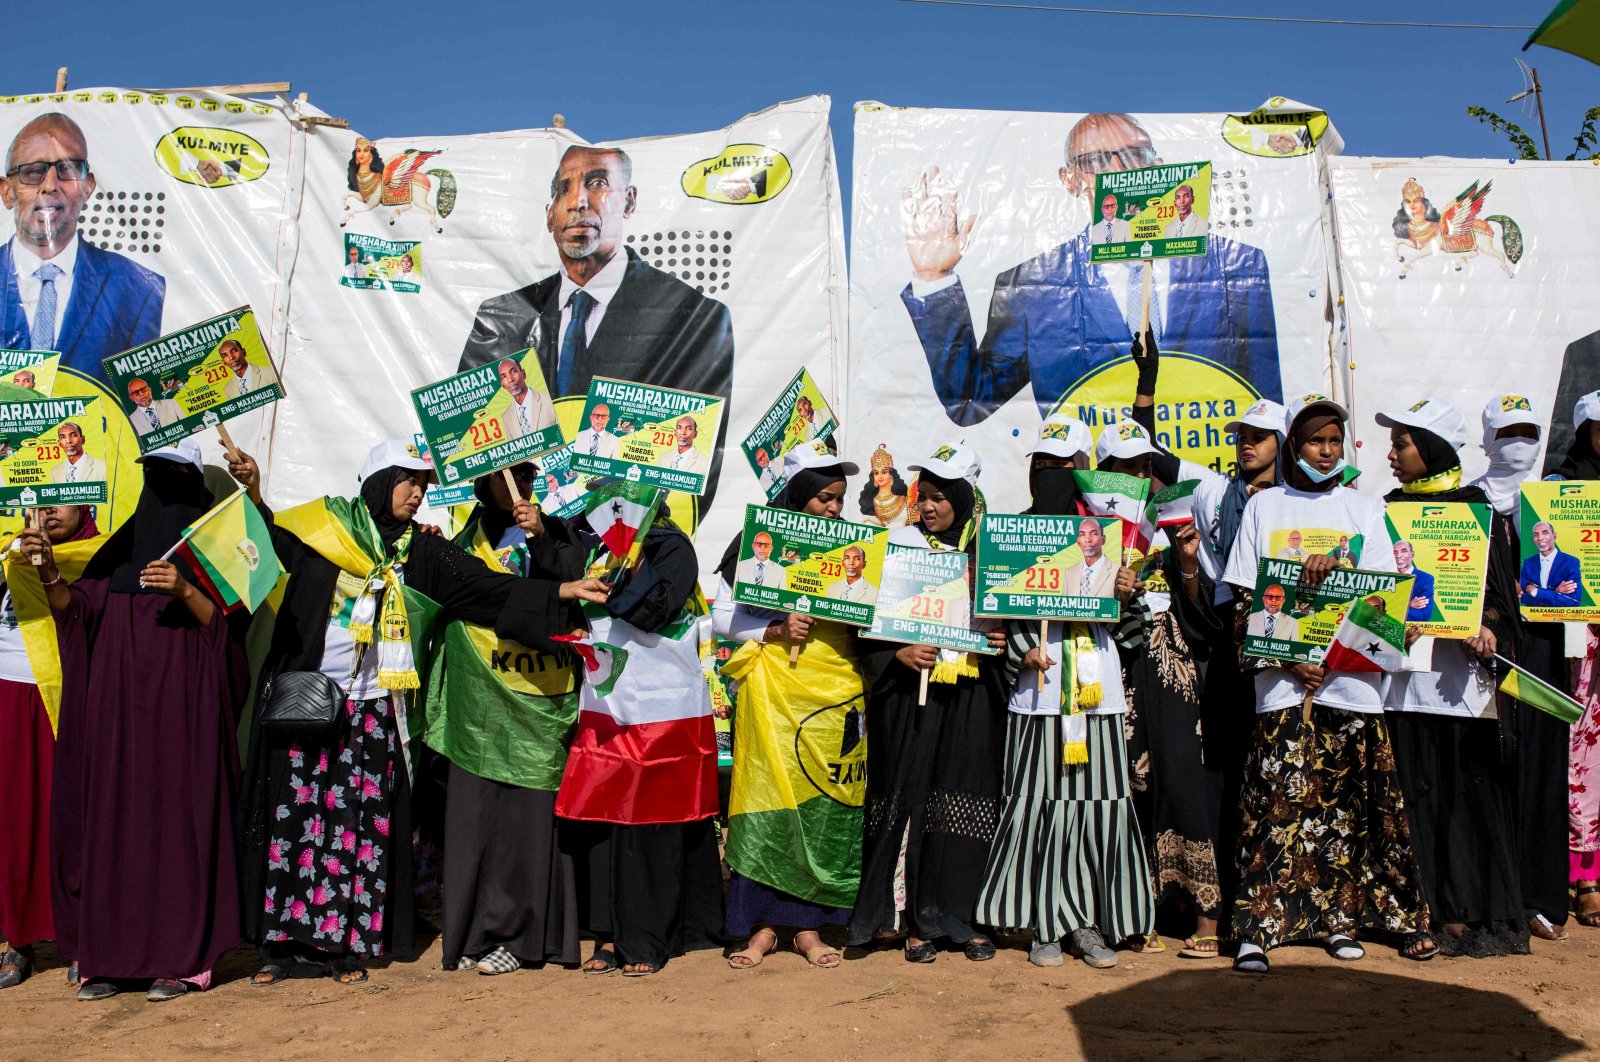 Supporters dance and chant during a rally of the ruling Kulmiye Party for Somaliland’s elections which is scheduled on May 31, 2021, in Hargeisa, the capital of the self-declared republic of Somaliland in northern Somalia, on May 27, 2021. (AFP Photo)